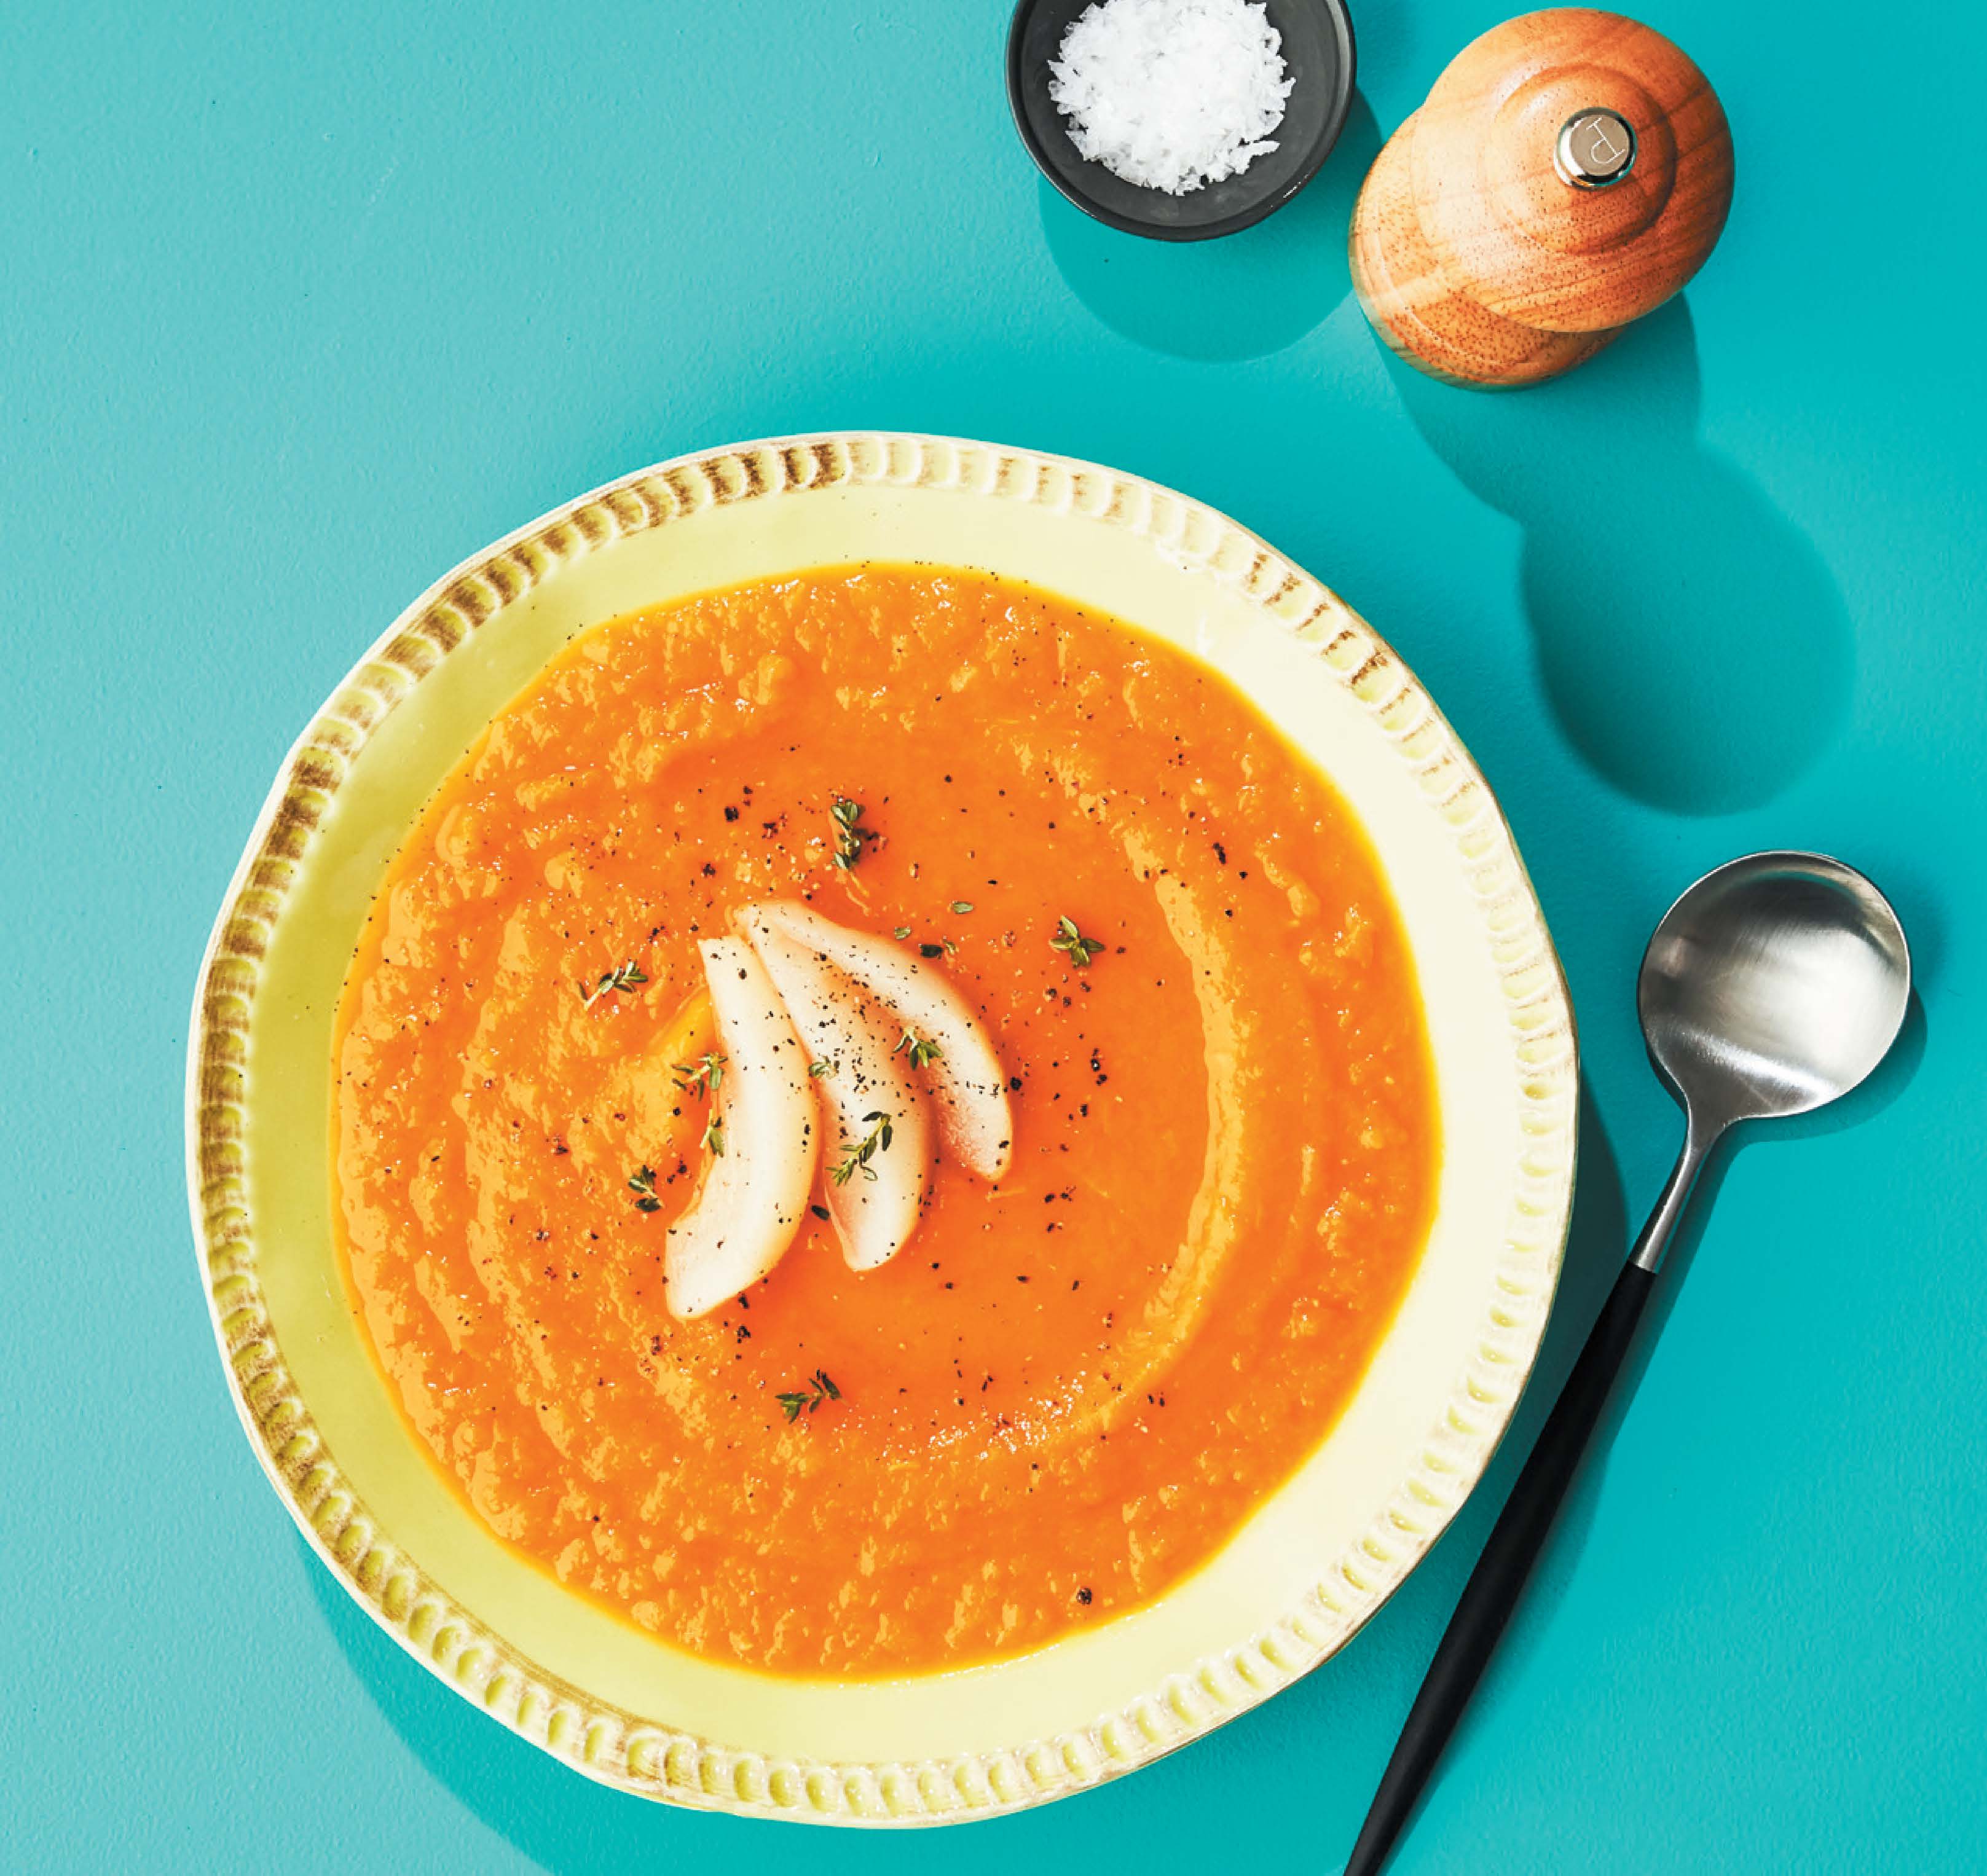 Sweet potato, fennel and ginger soup with spiced pears